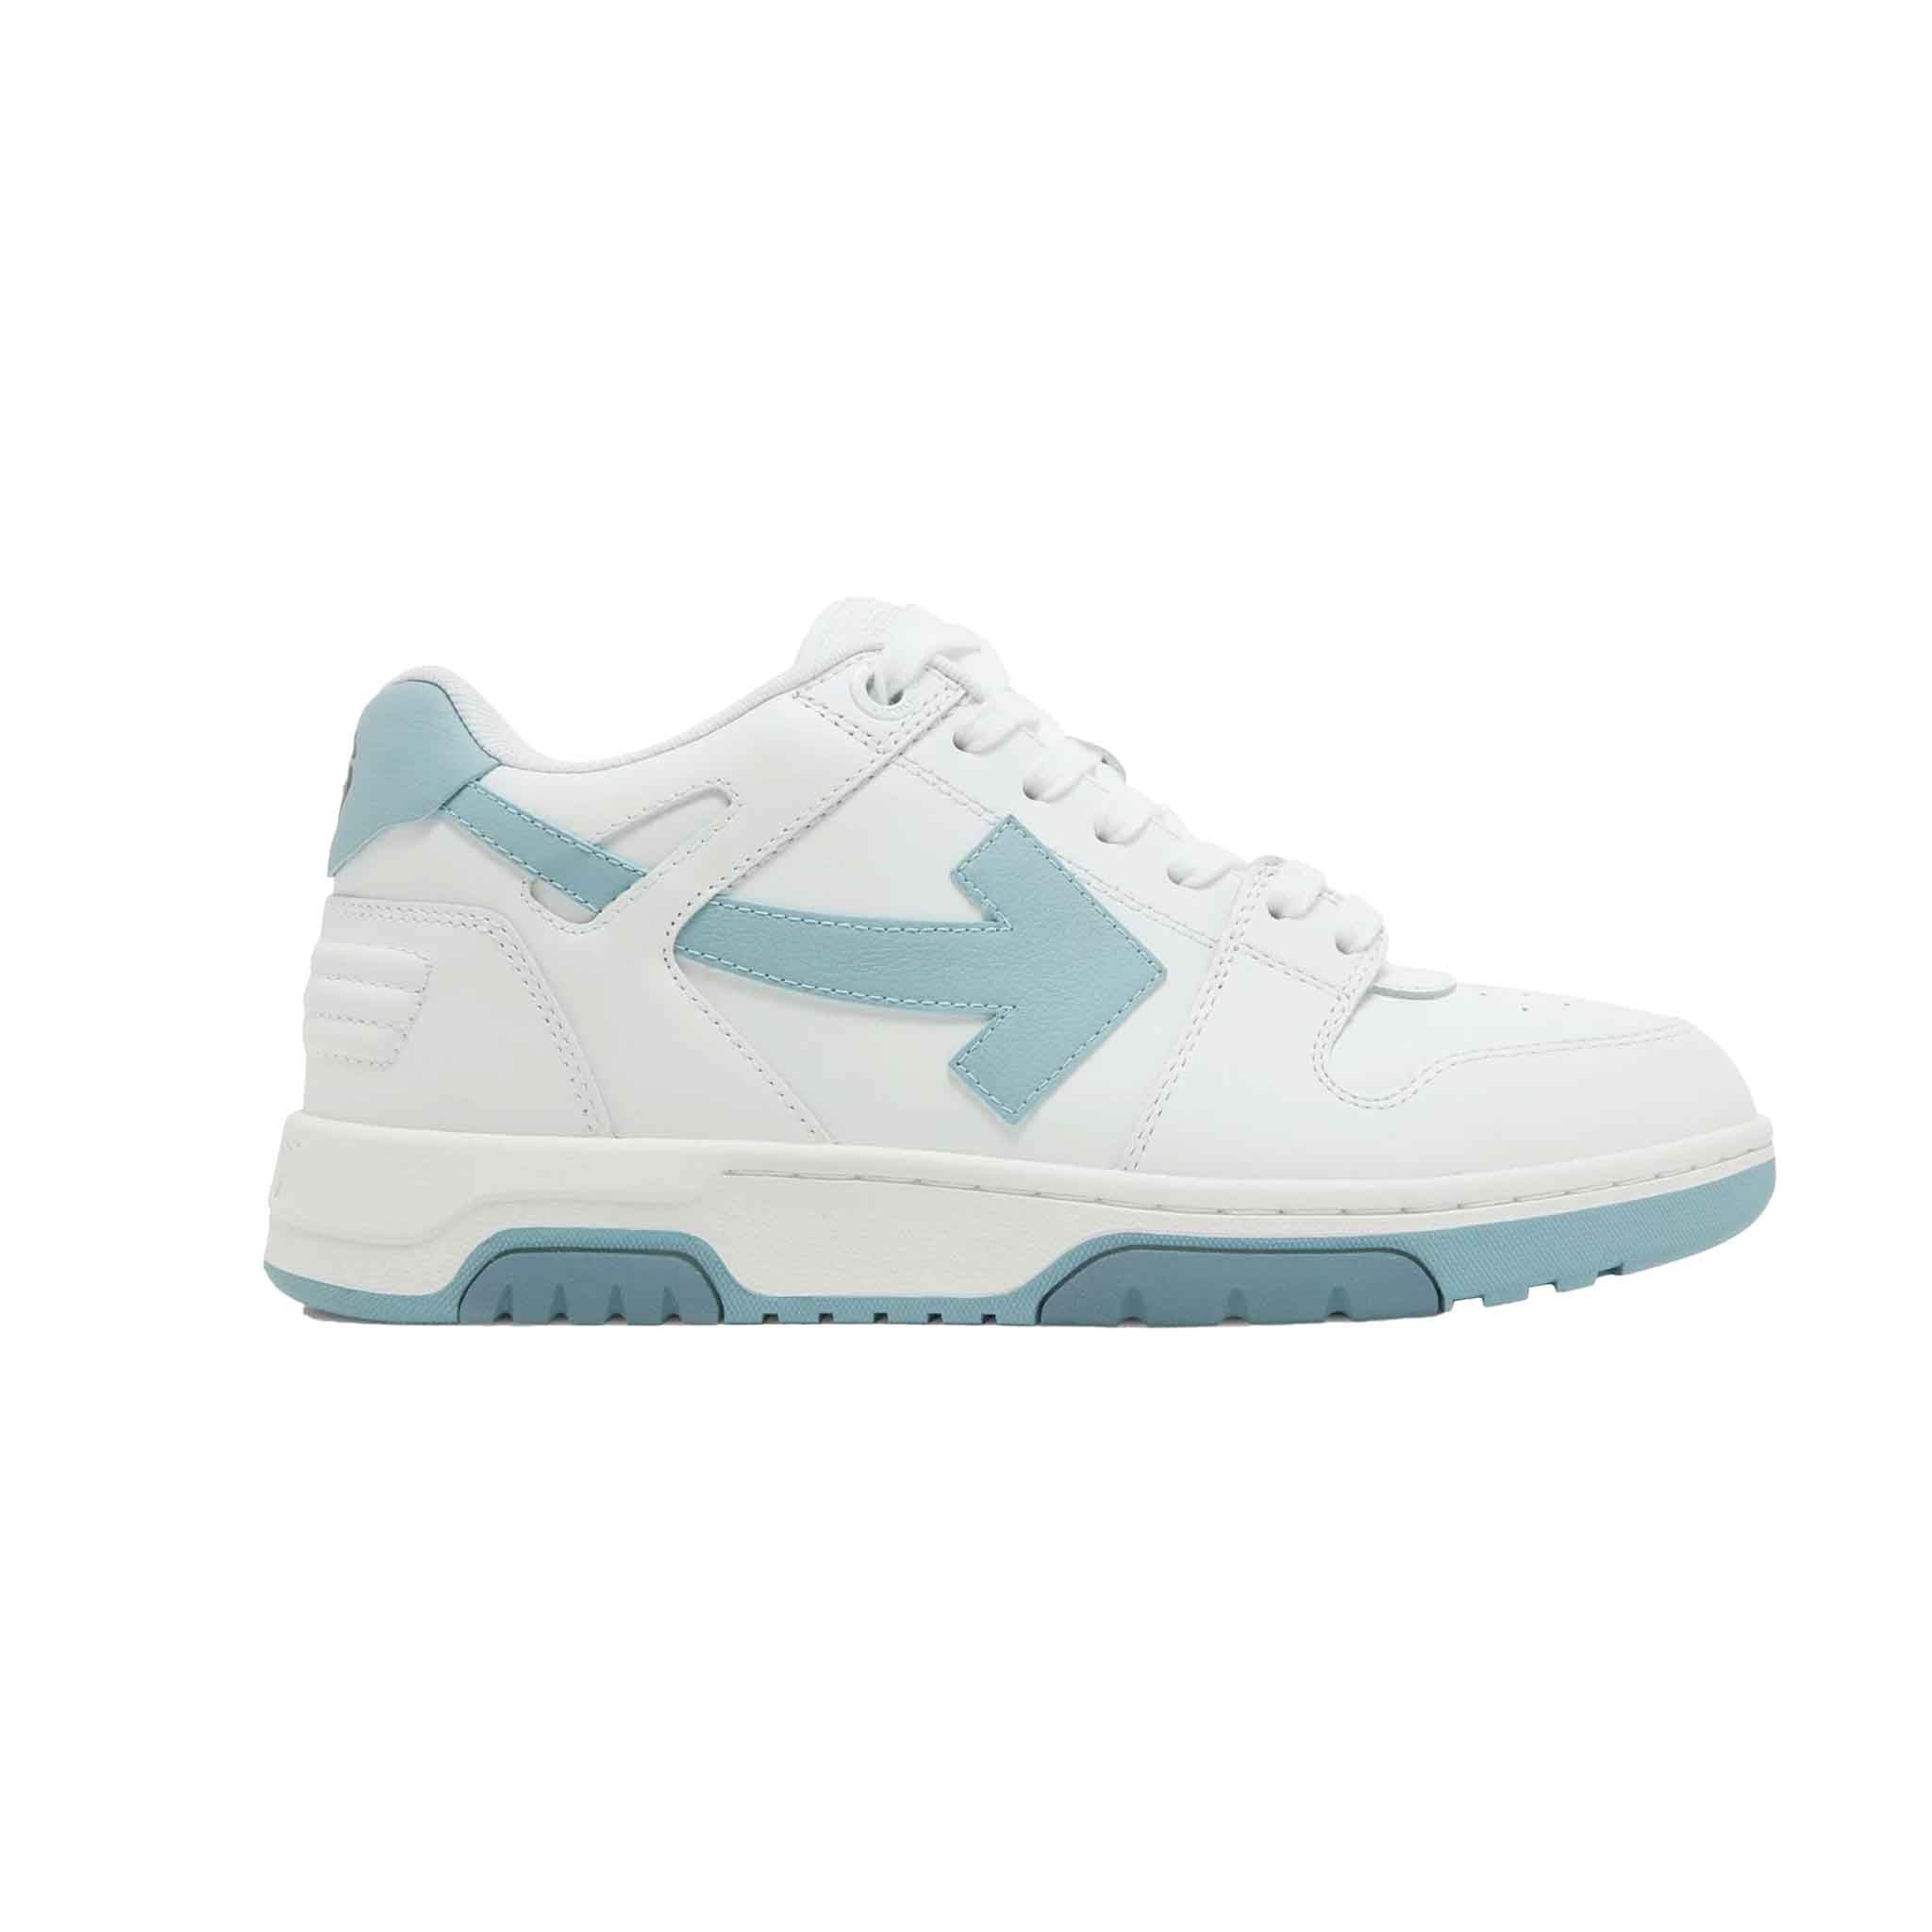 OFF-WHITE Out Of Office Sneaker Leather in White/Celadon